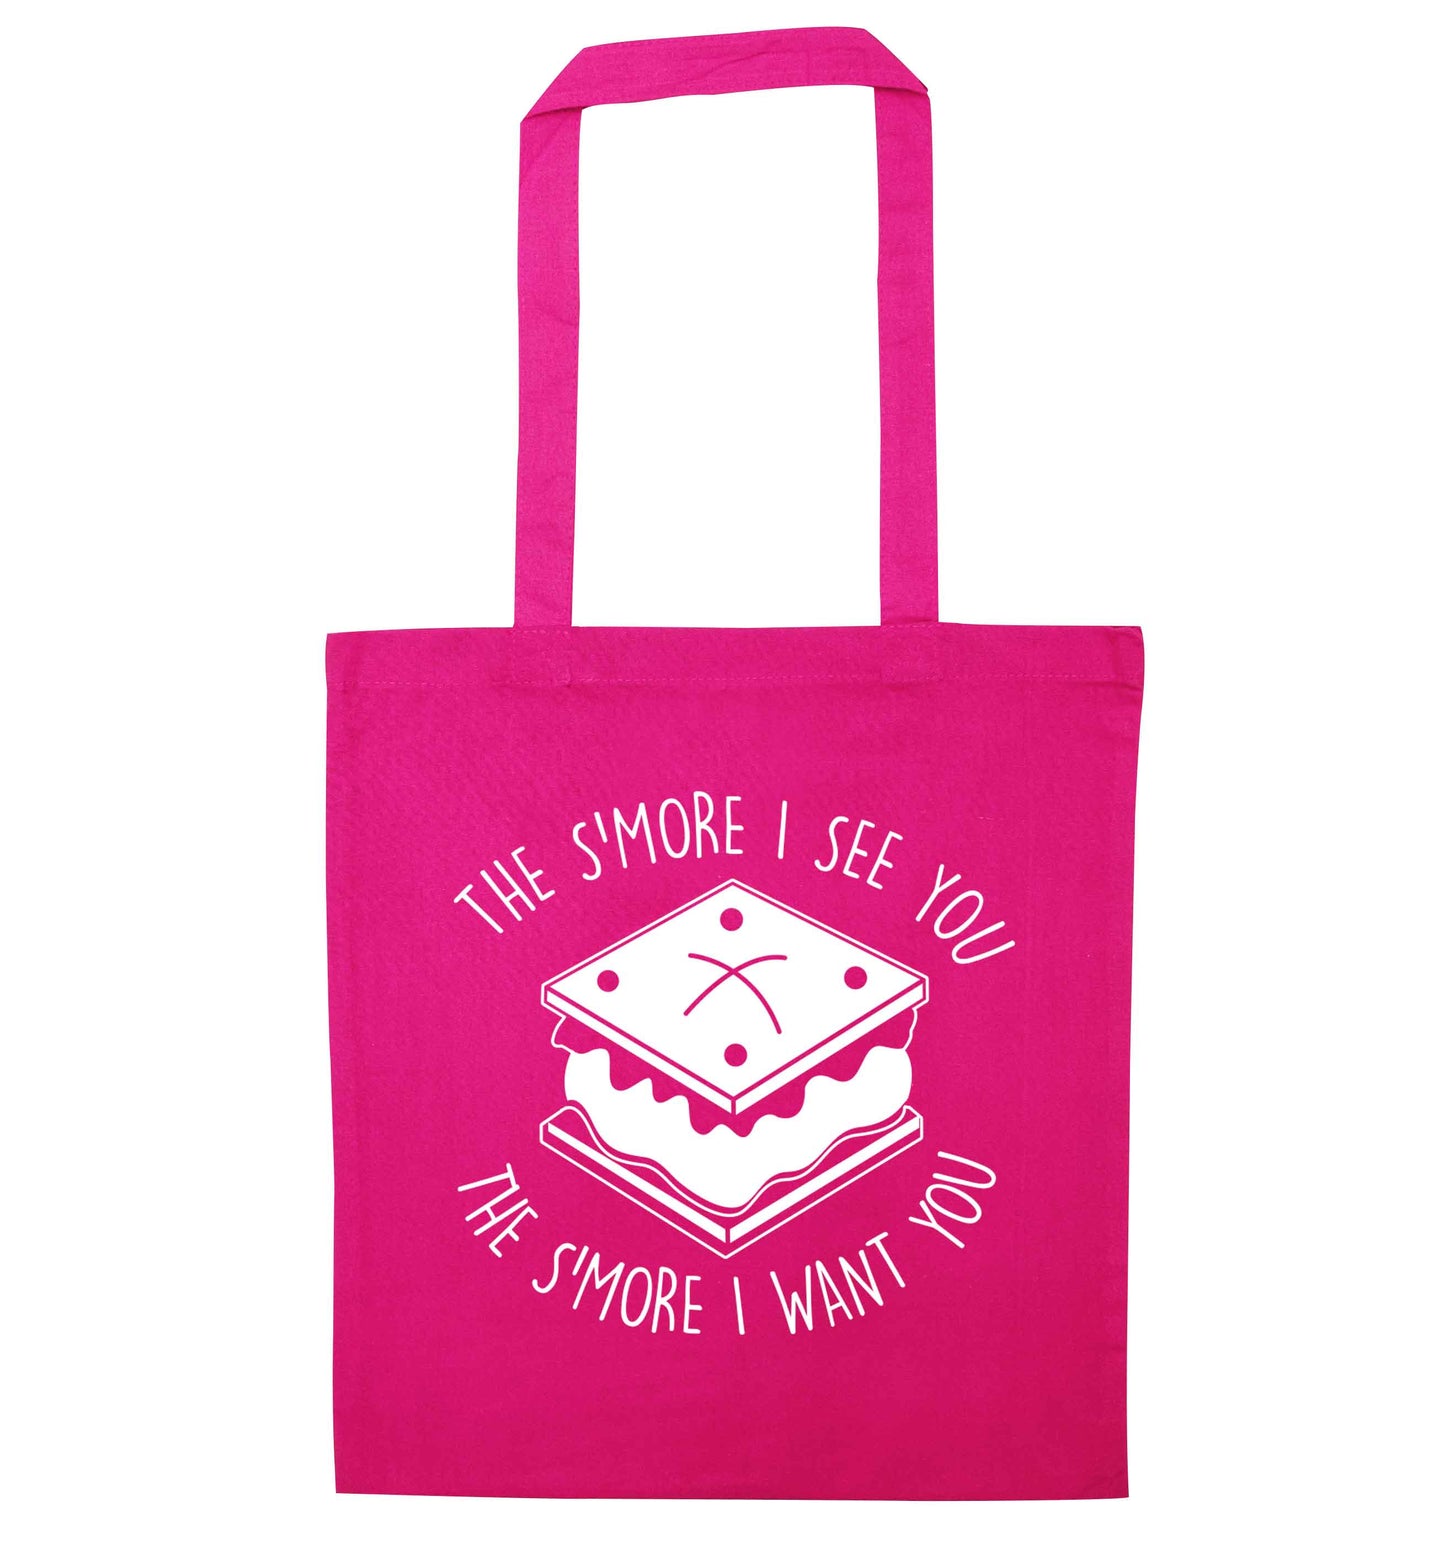 The s'more I see you the s'more I want you pink tote bag